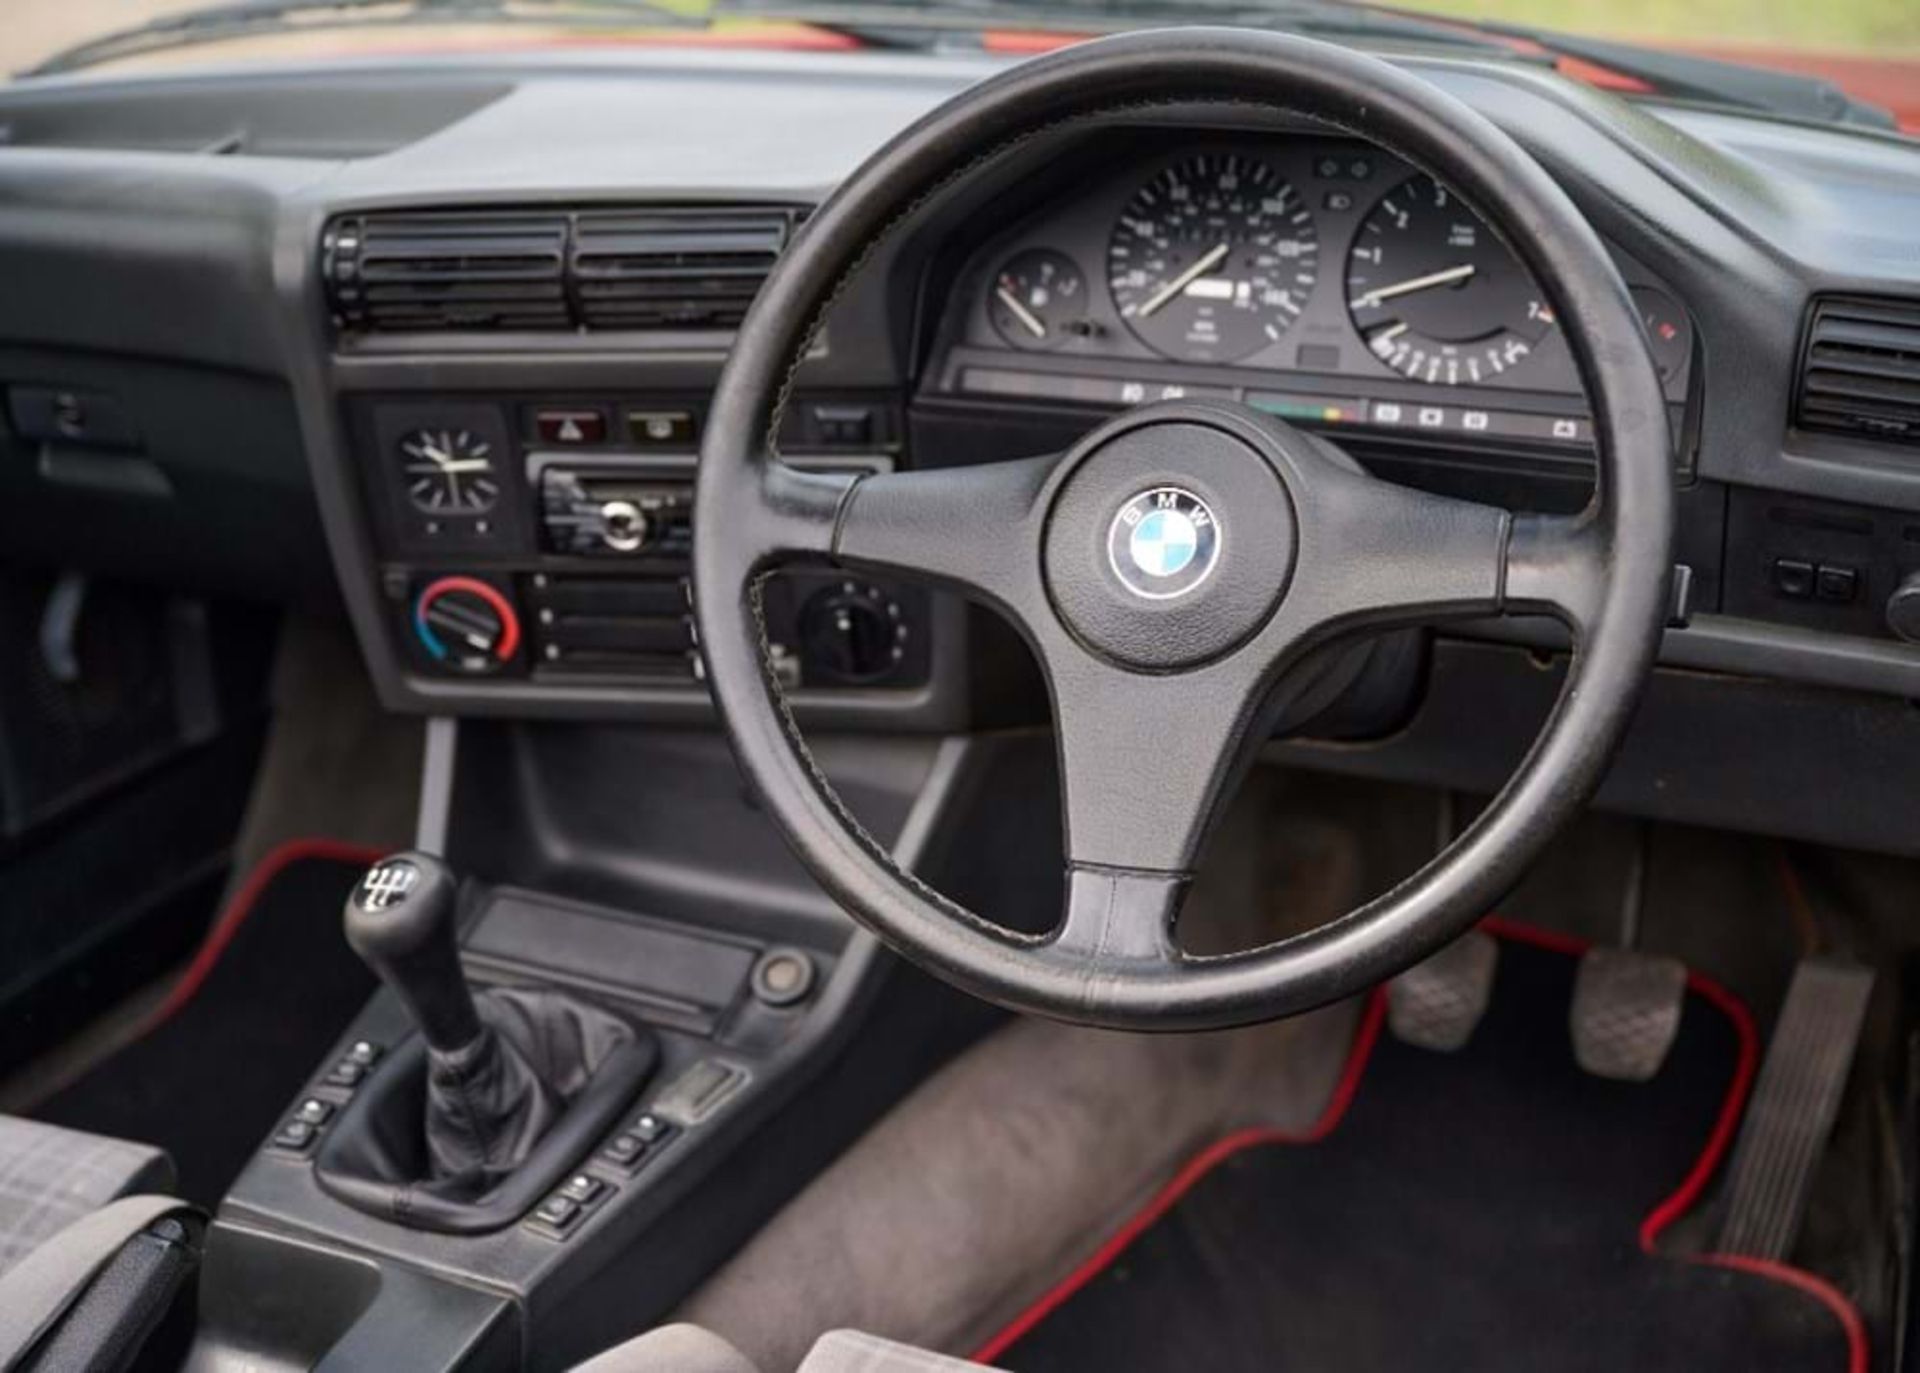 1989 BMW 325i Convertible - Image 10 of 10